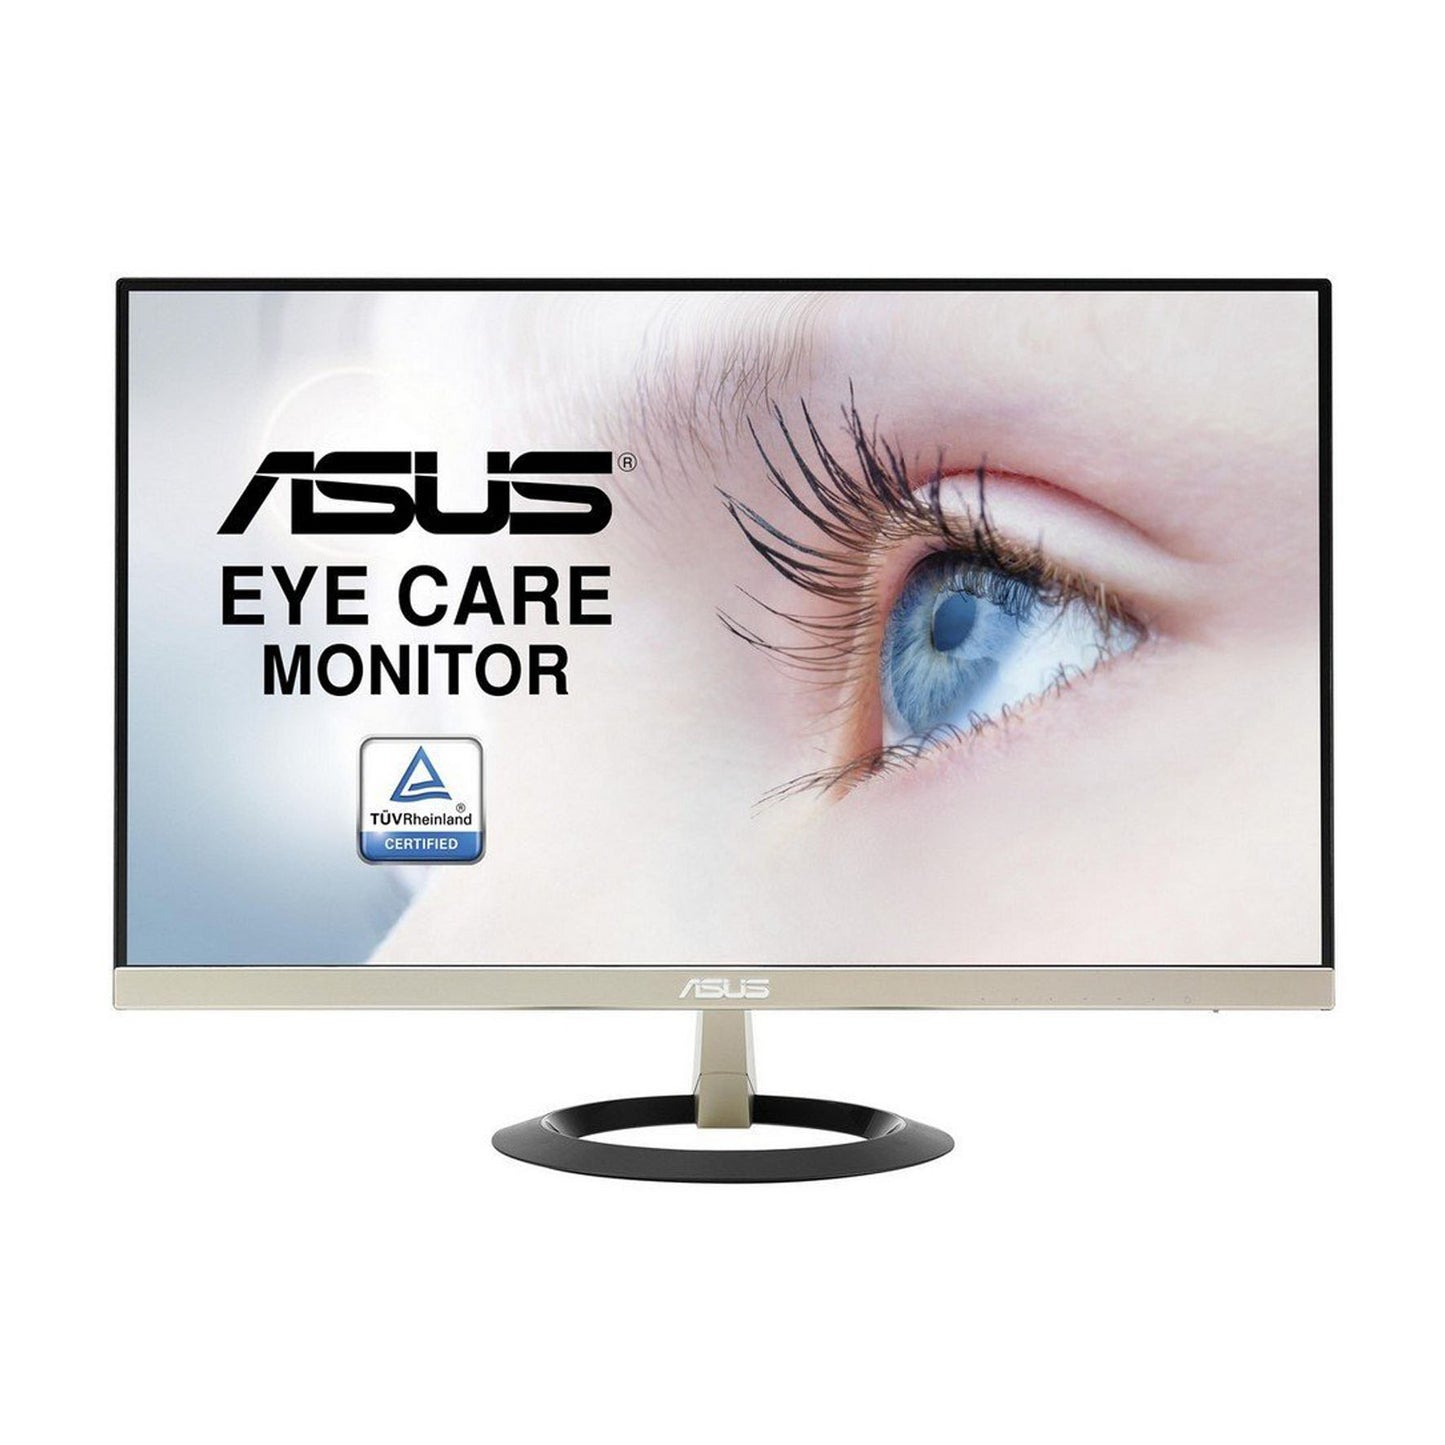 ASUS VZ249H 23.8-inch Full HD Ultra-low Blue Light Eye Care Monitor - The Peripheral Store | TPS